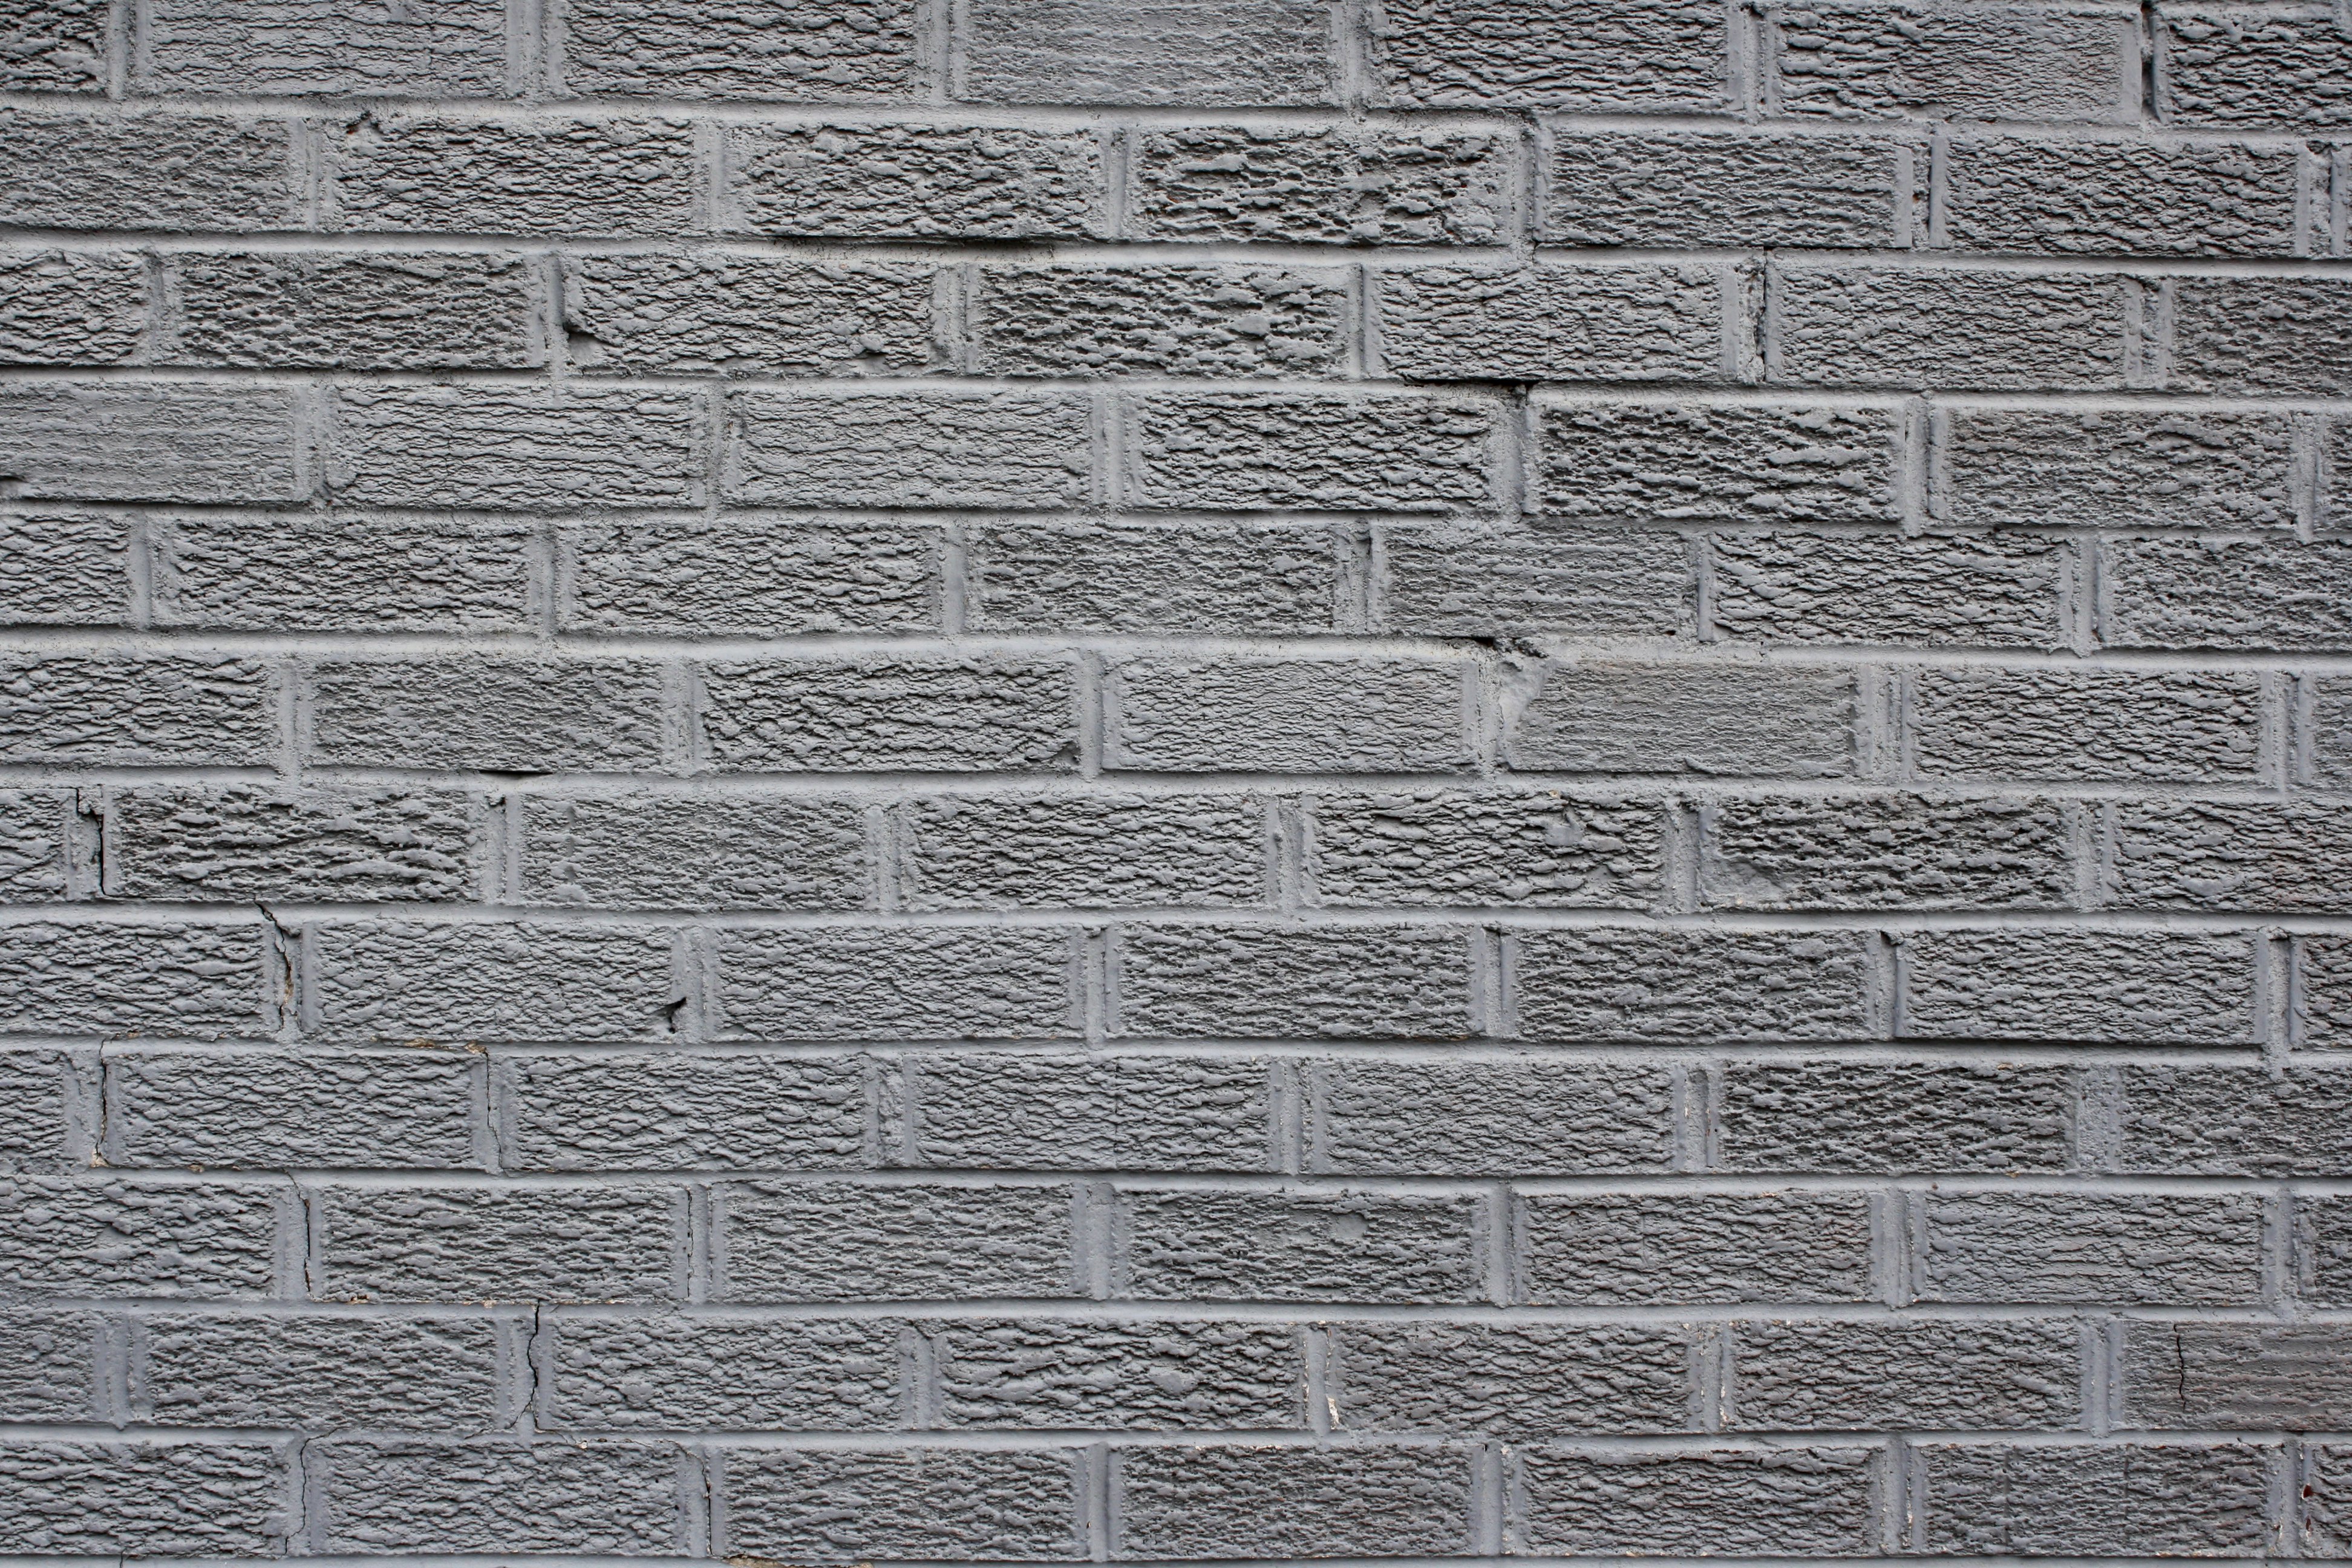 Gray Brick Wall Texture Picture, Free Photograph